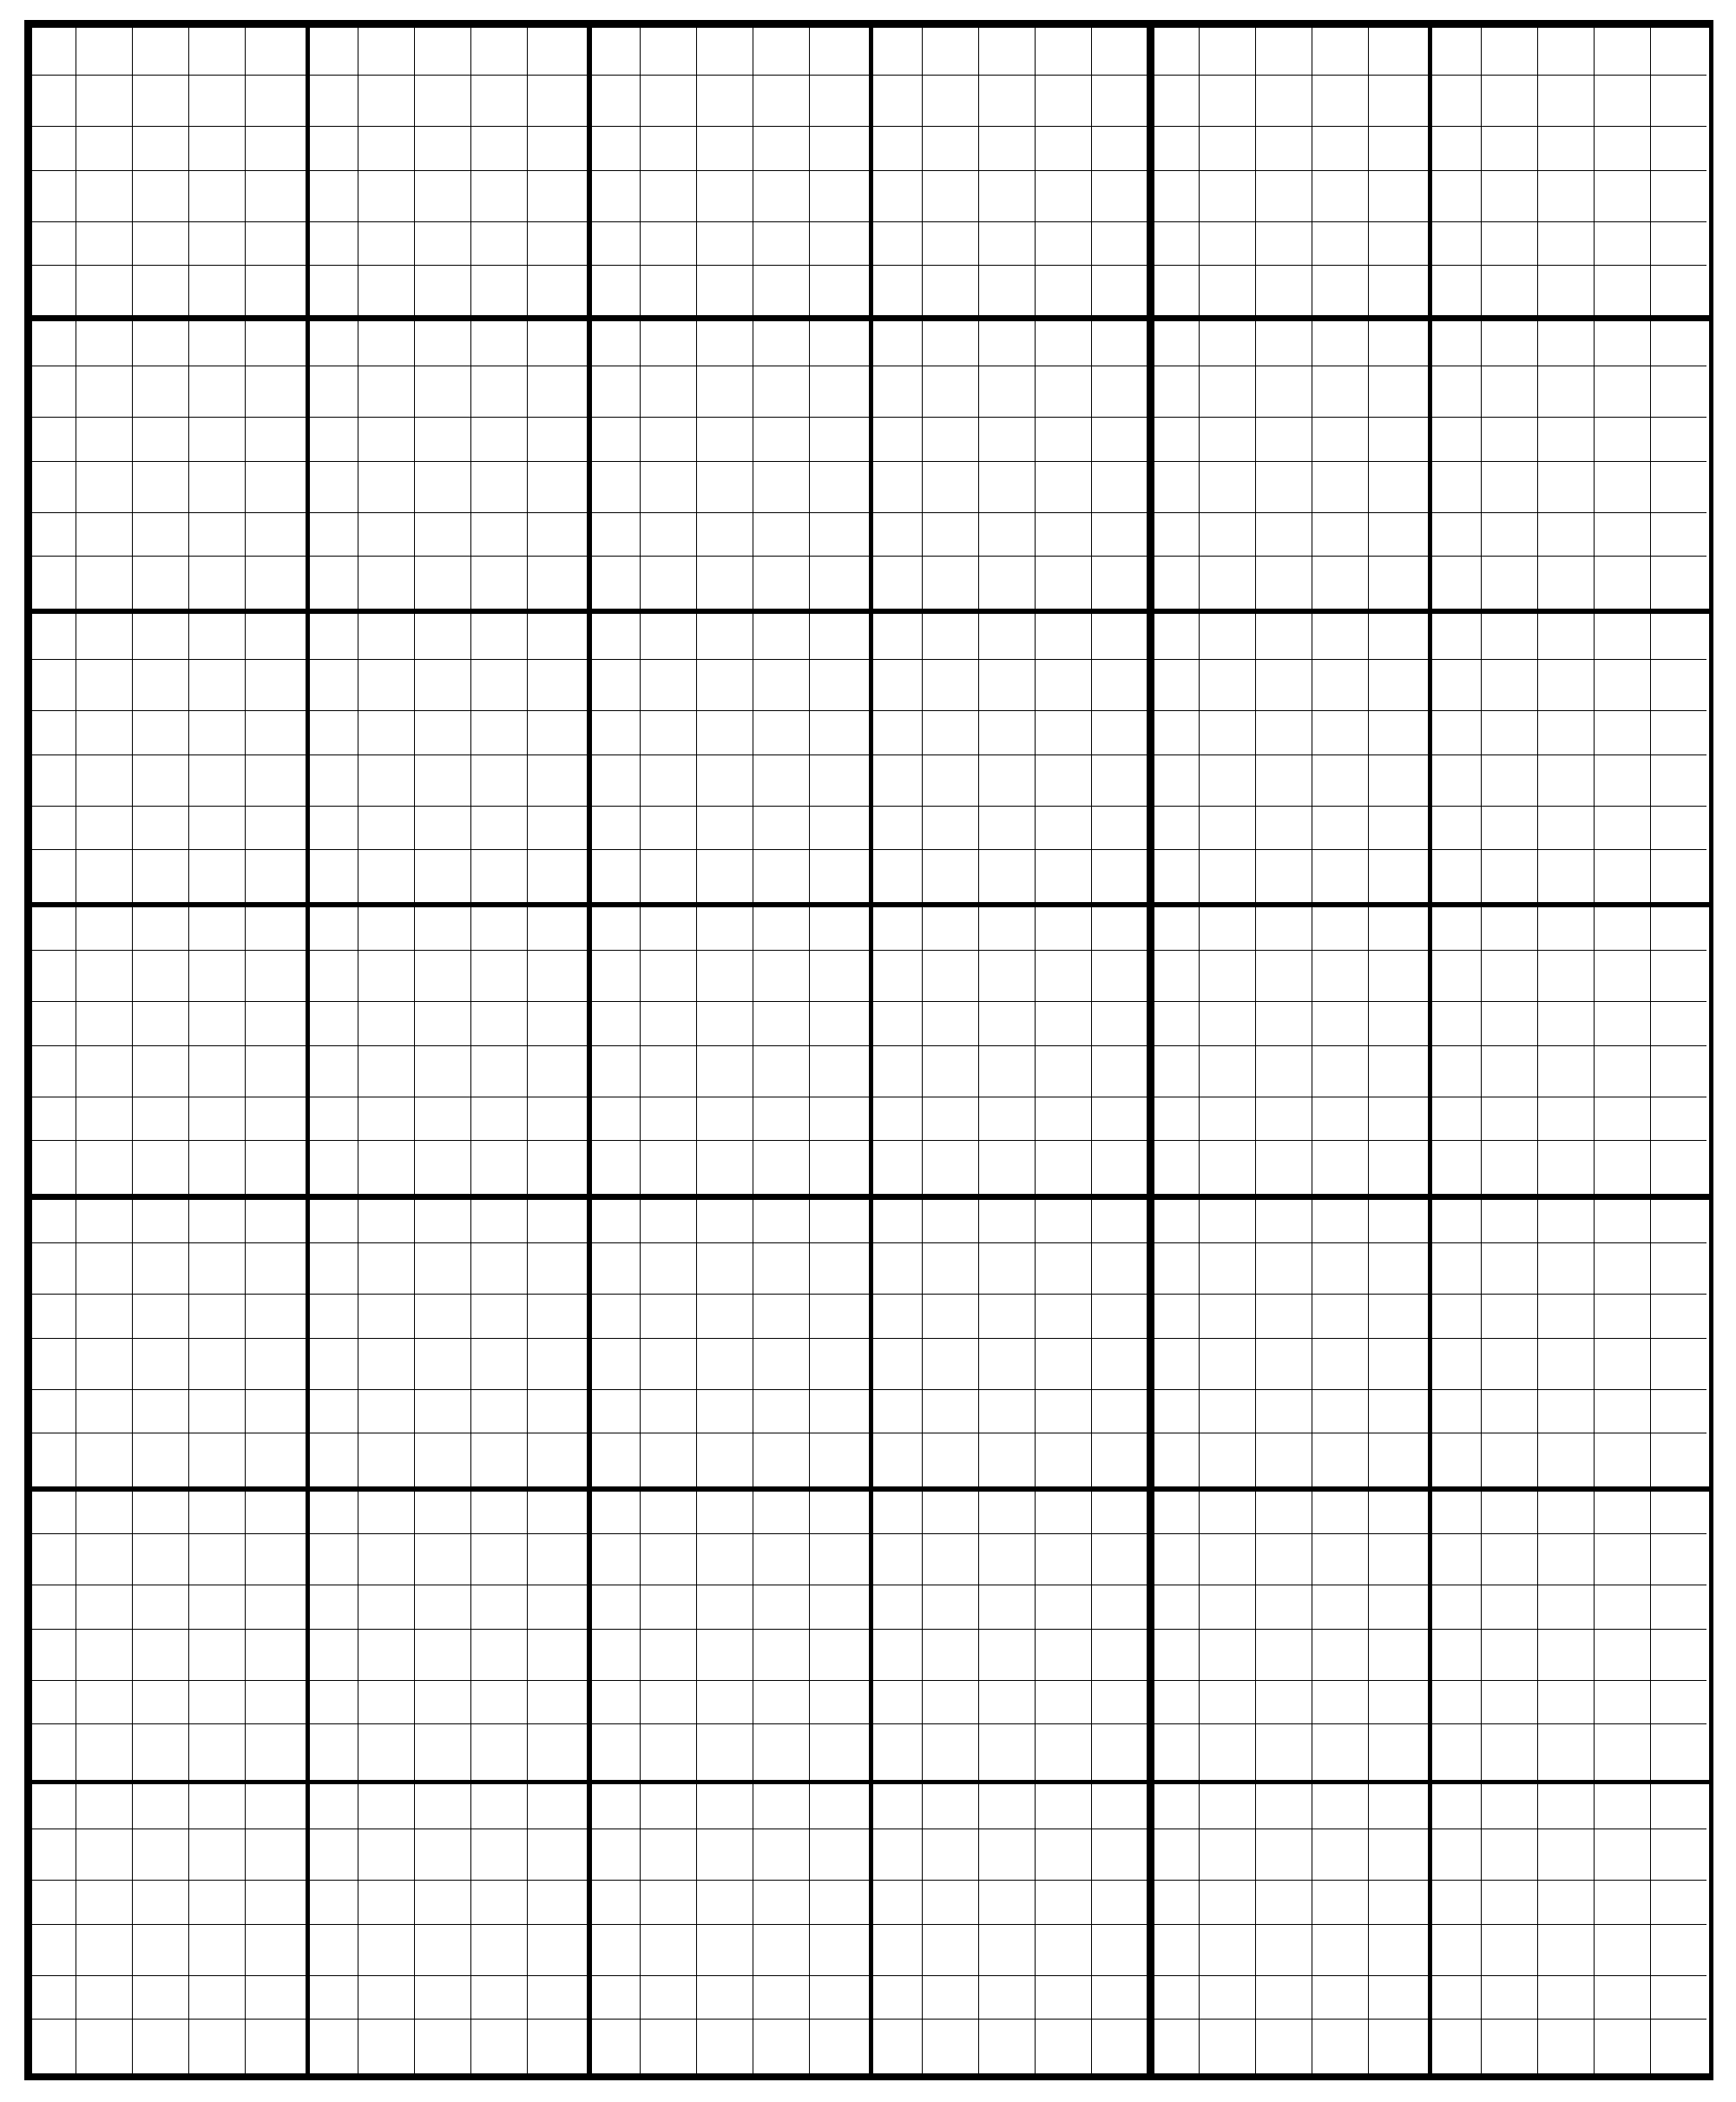 Printable Grid Paper Template - 12+ Free PDF Documents Download